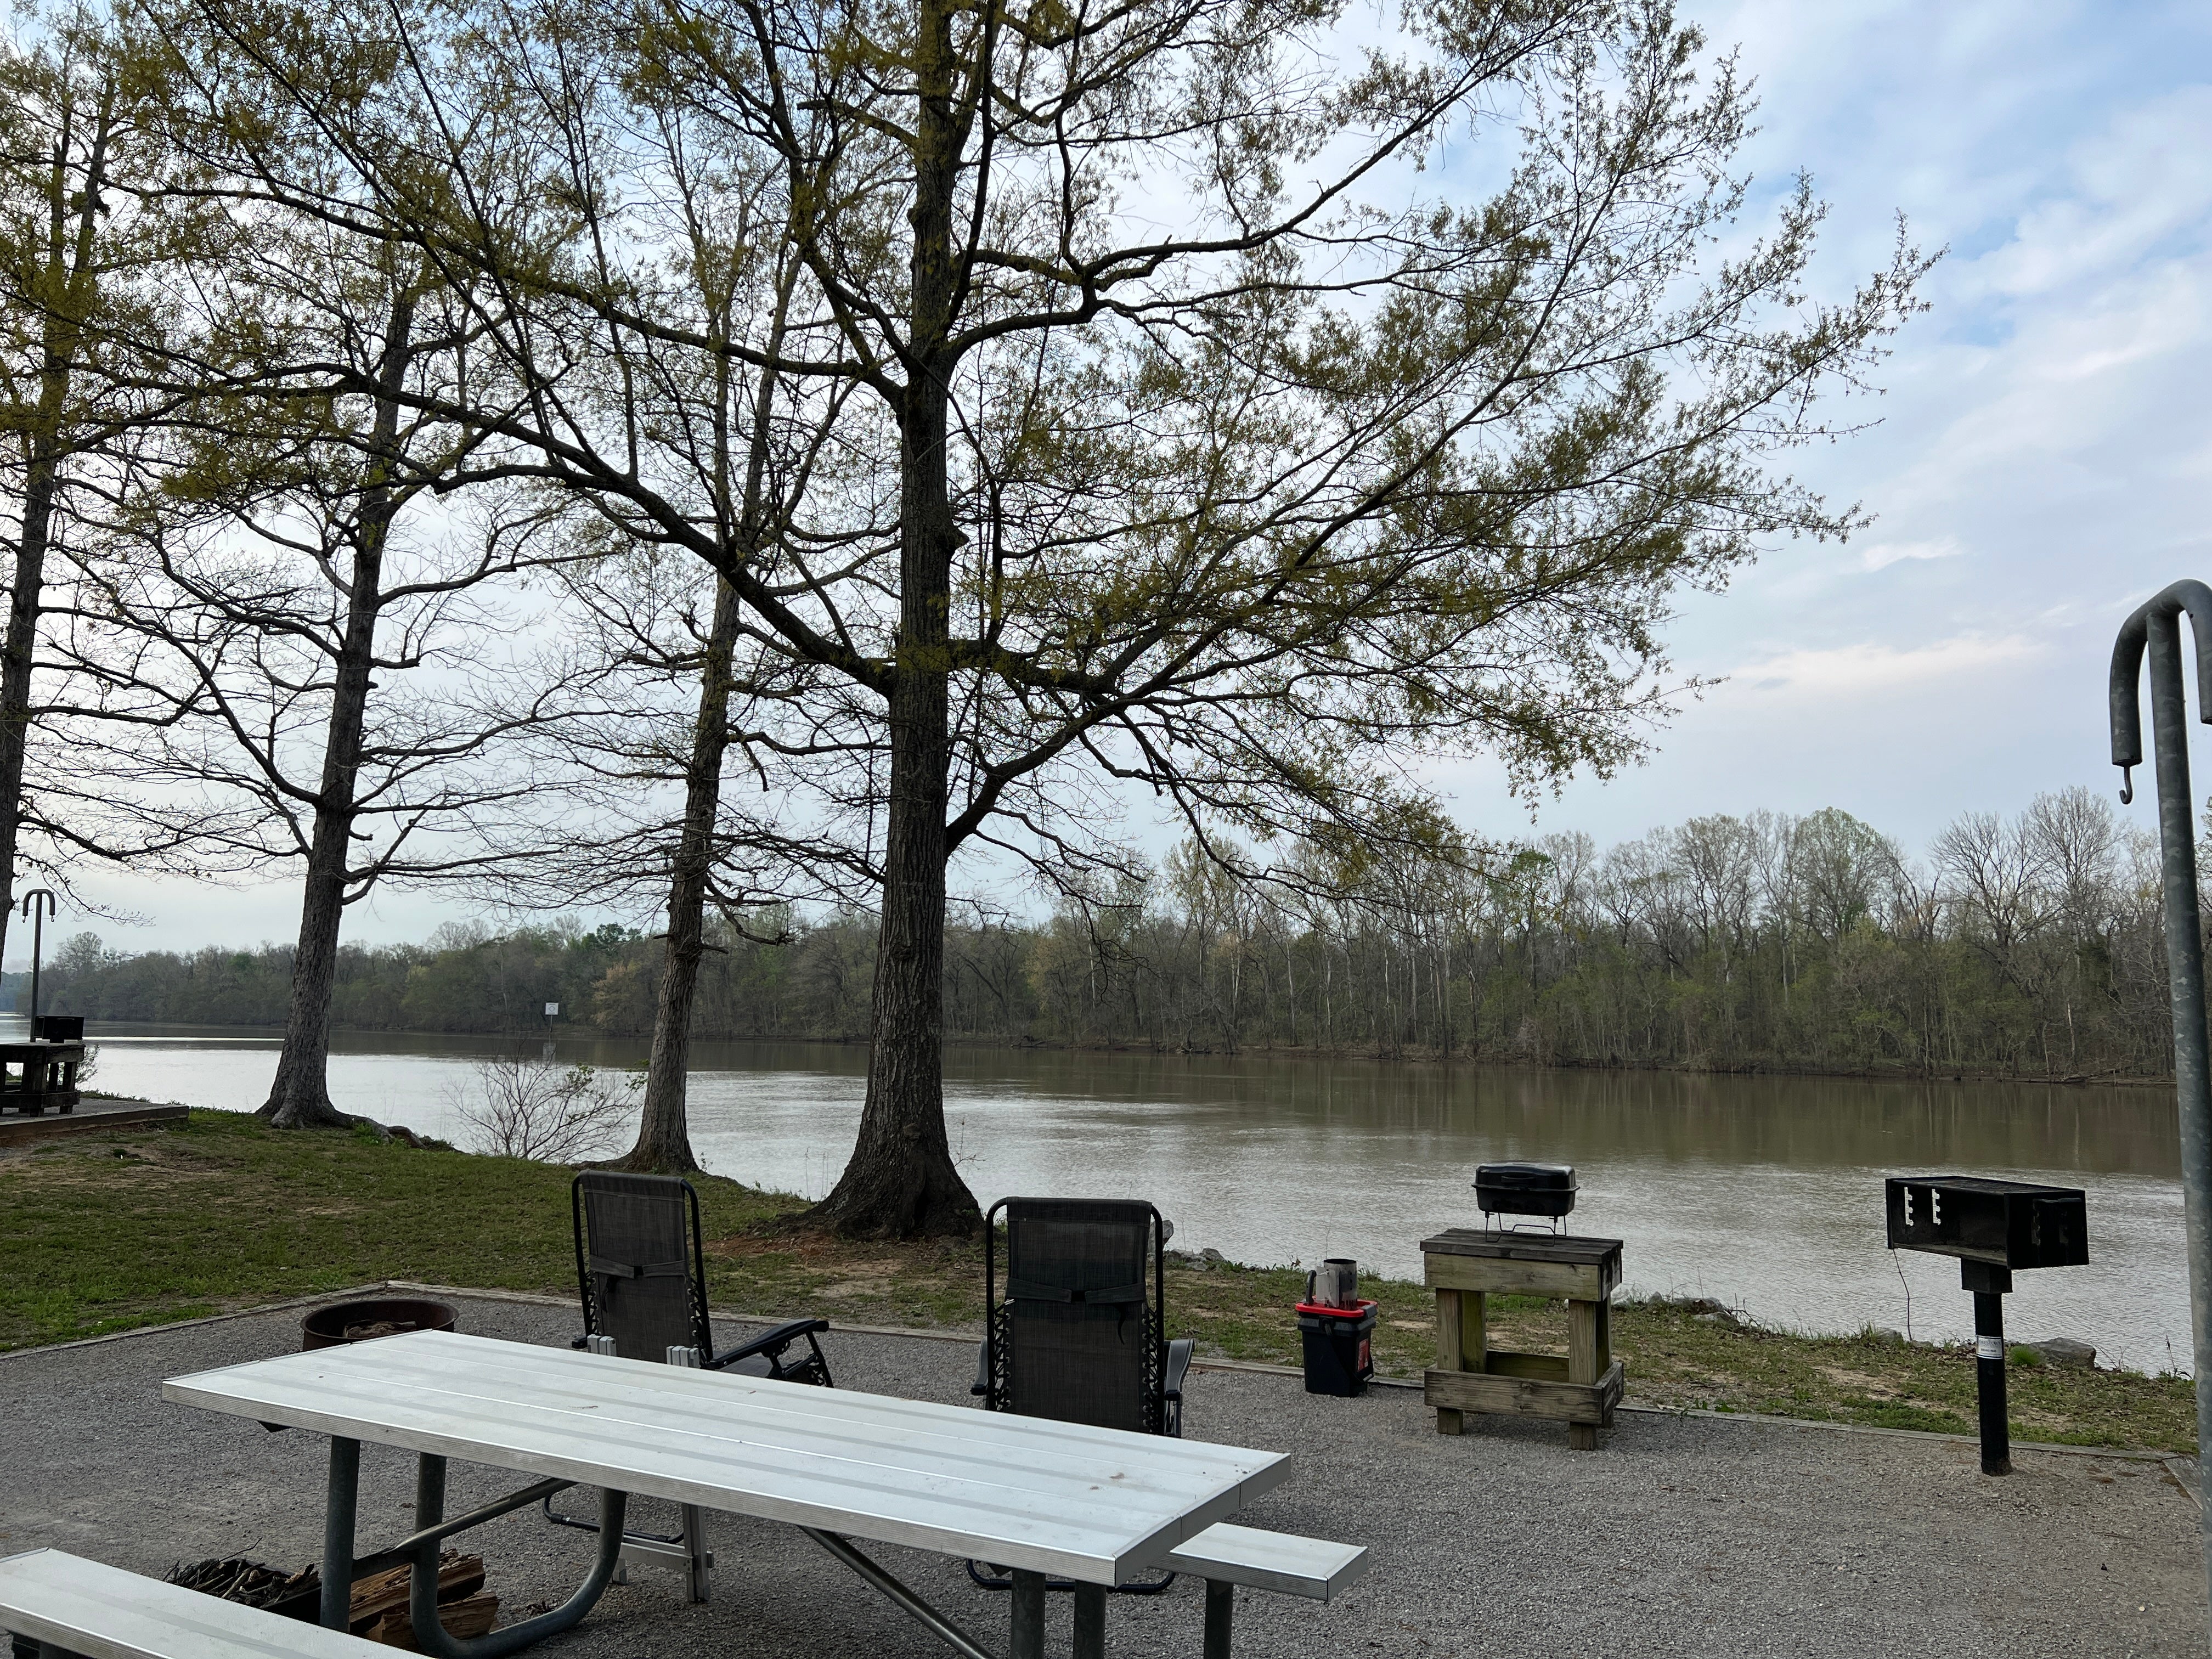 Camper submitted image from COE Demopolis Lake Foscue Creek Campground - 2